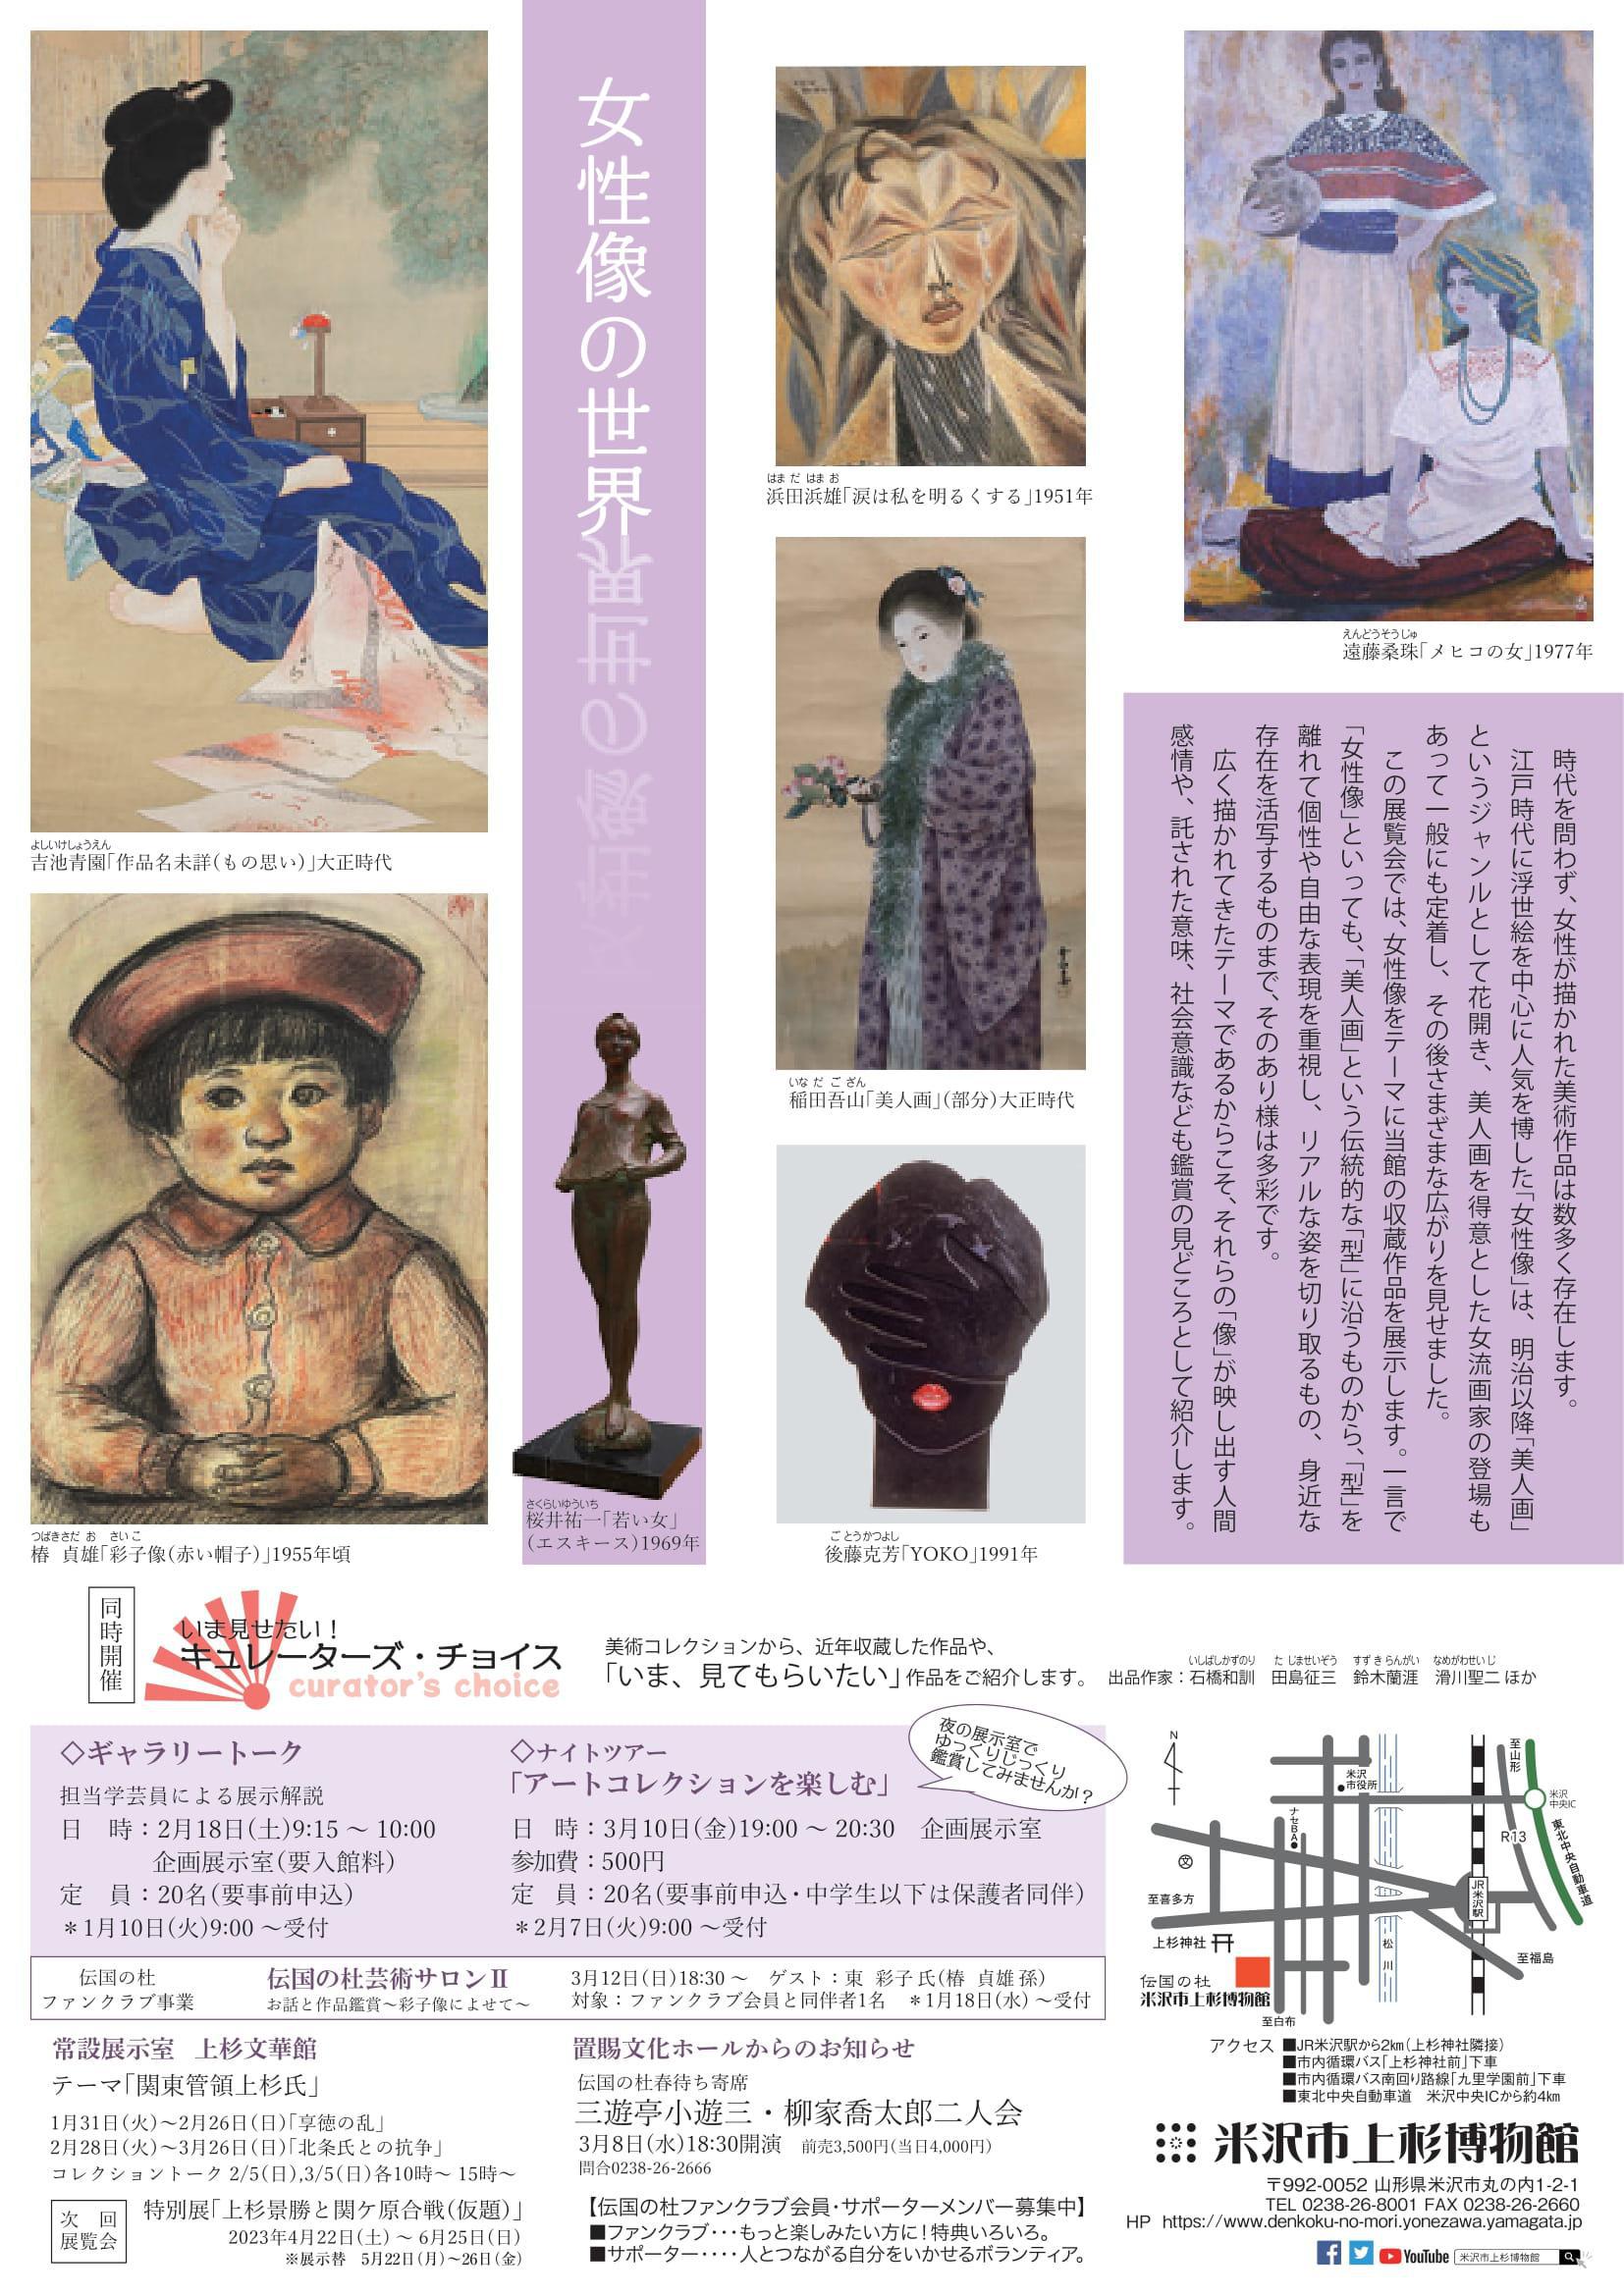 Yonezawa City Uesugi Museum Art Collection “The World of the Female Form”